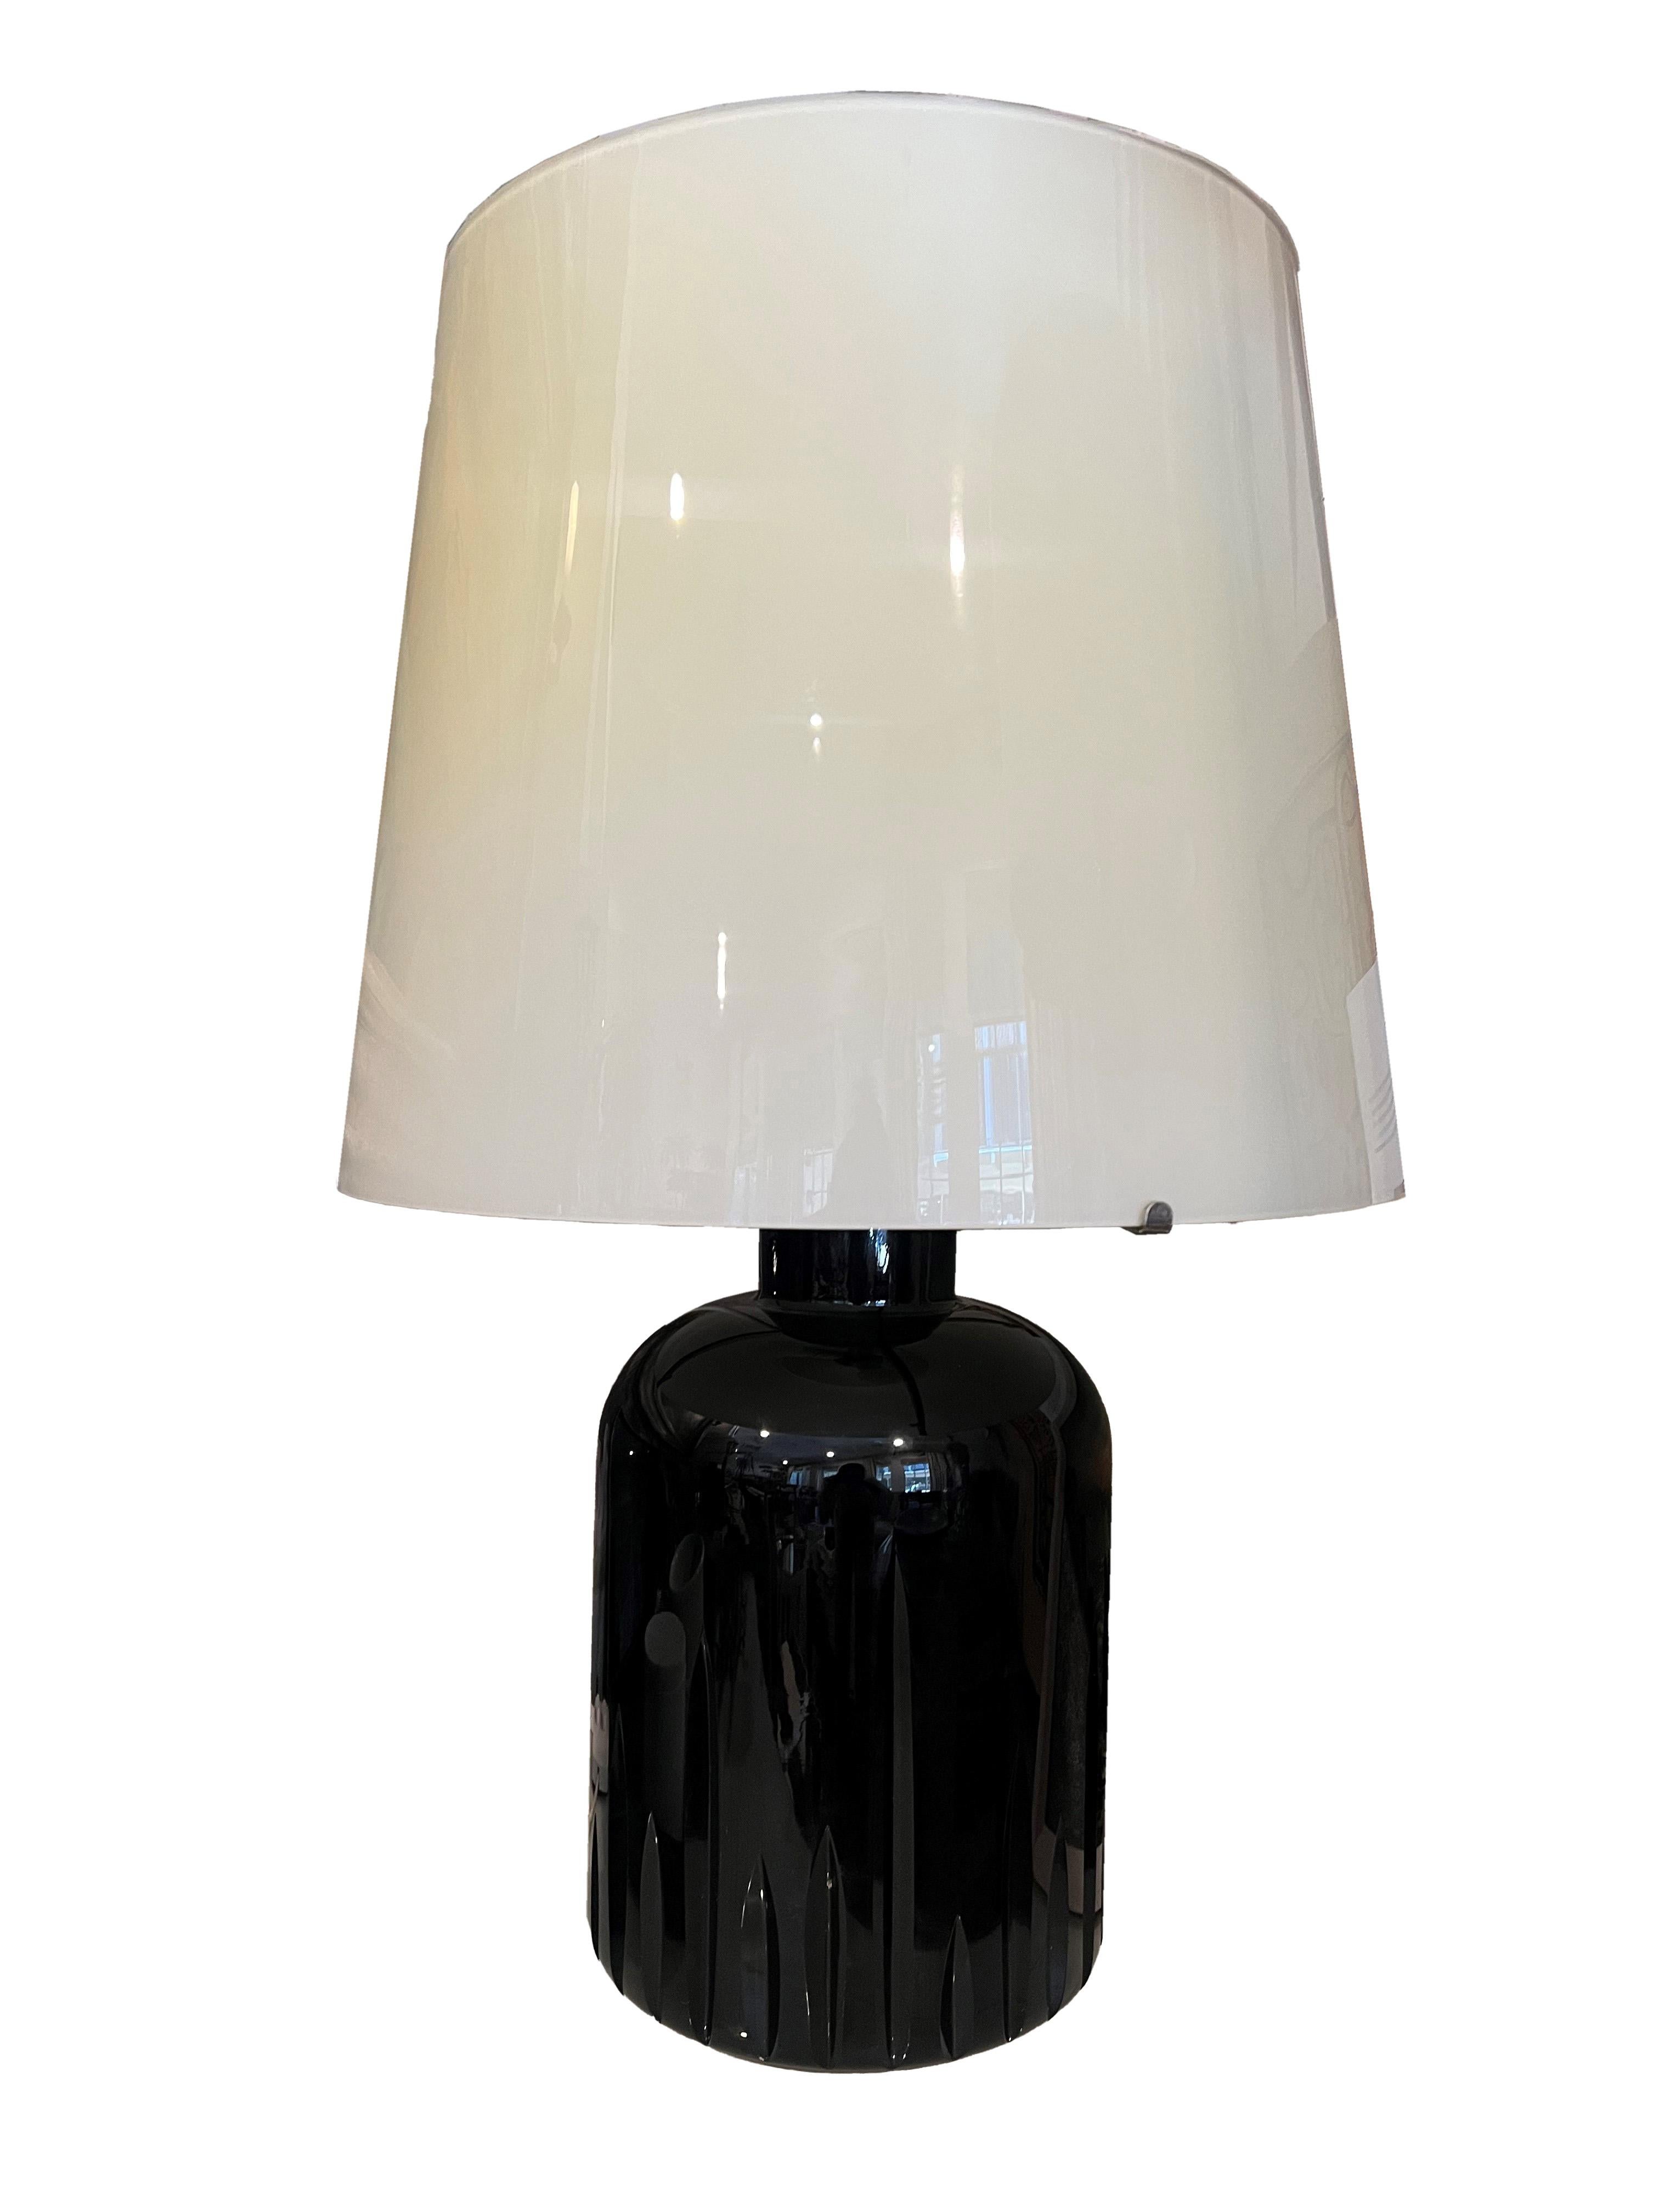 A rare and enchanting pair of Murano Glass table lamps, a unique treasure from the 1970s. These one-of-a-kind lamps were specially designed and crafted for a luxury ski resort in Switzerland, embodying the unparalleled elegance and artistry of that